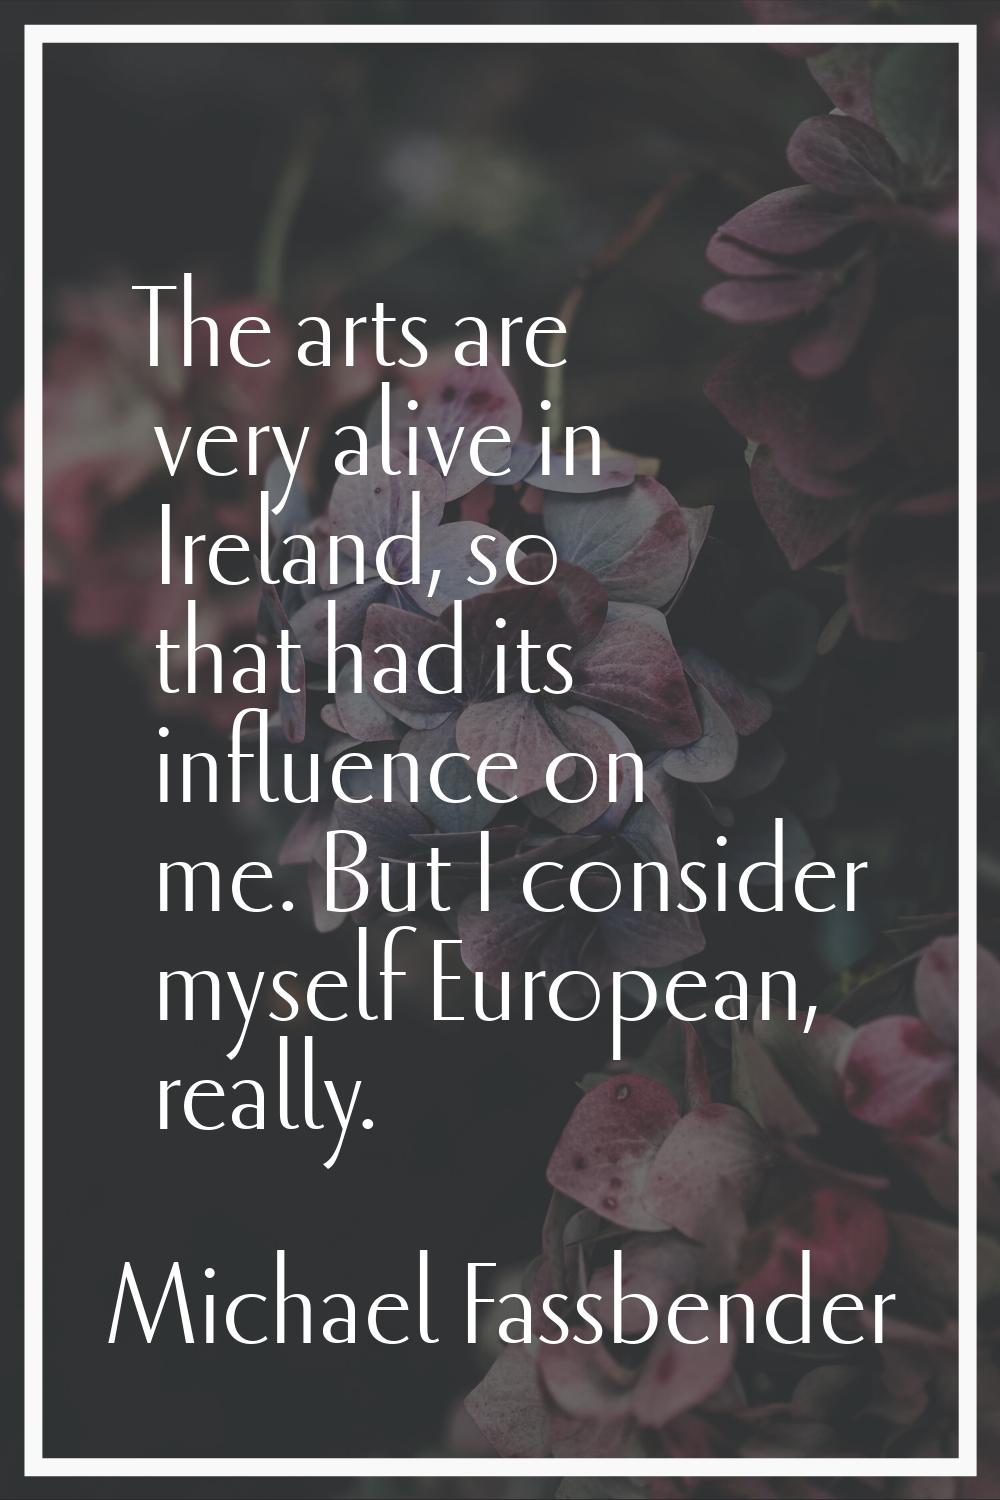 The arts are very alive in Ireland, so that had its influence on me. But I consider myself European